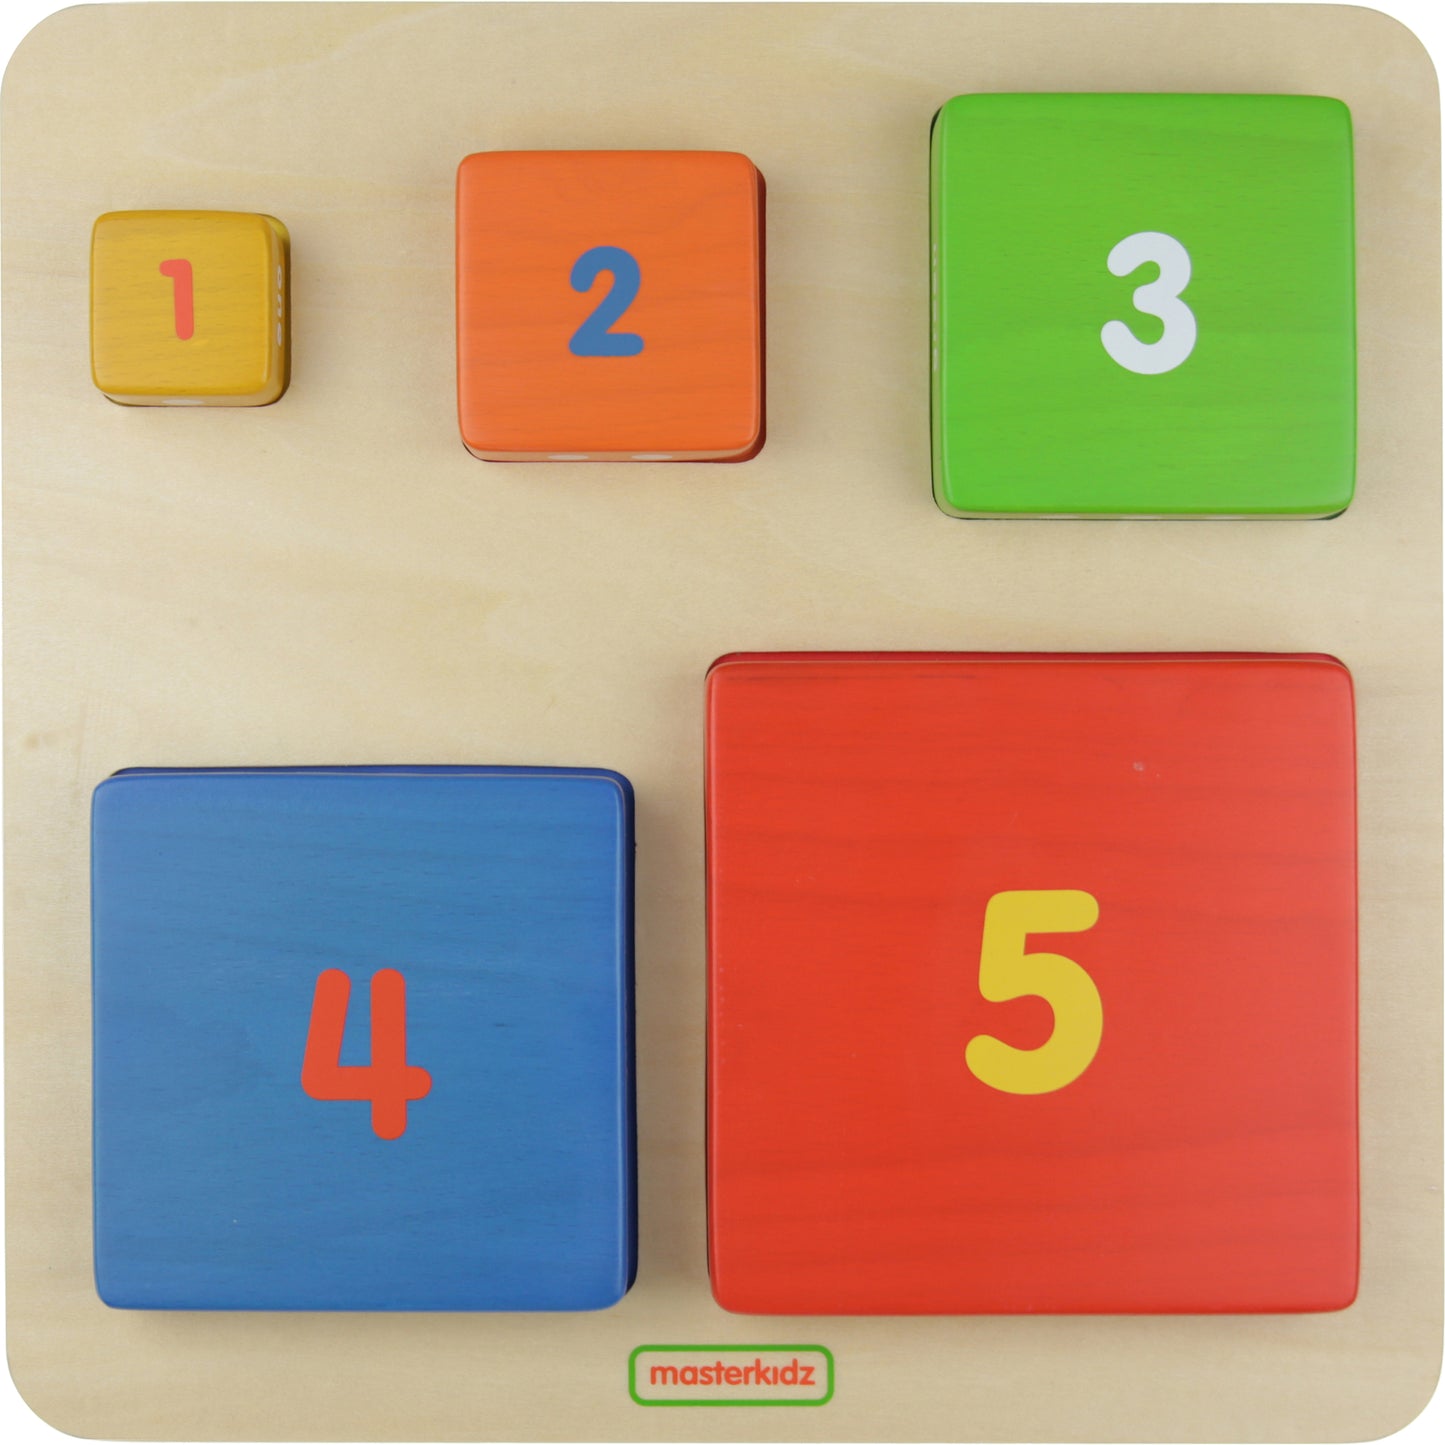 Masterkidz Numbers and Colours Stacking Blocks 數字顏色套塔遊戲台